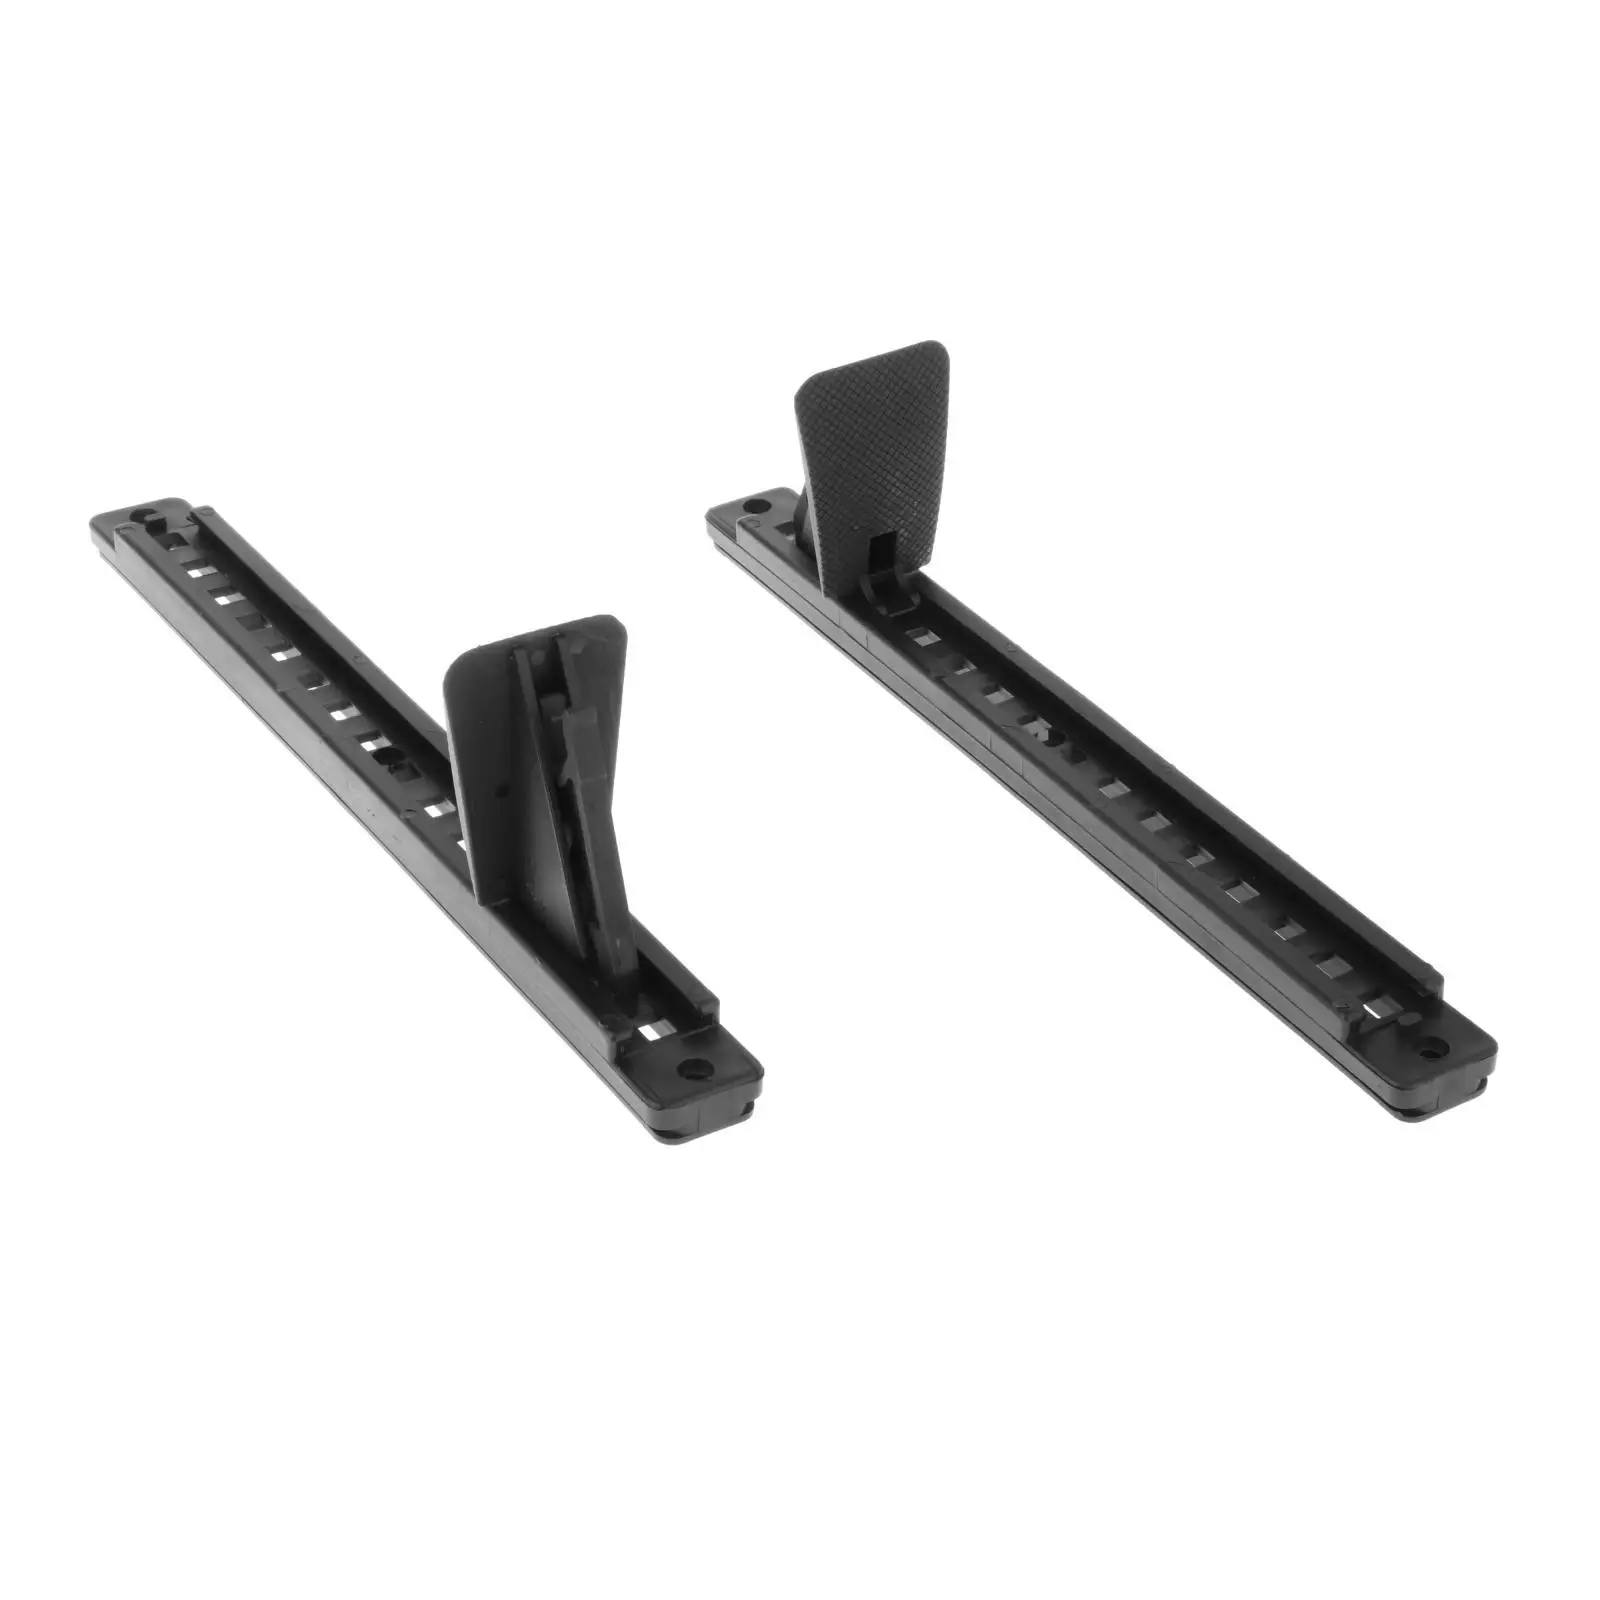 Kayak Foot Pegs, Foot Pedals Replacement 15 Inches Universal